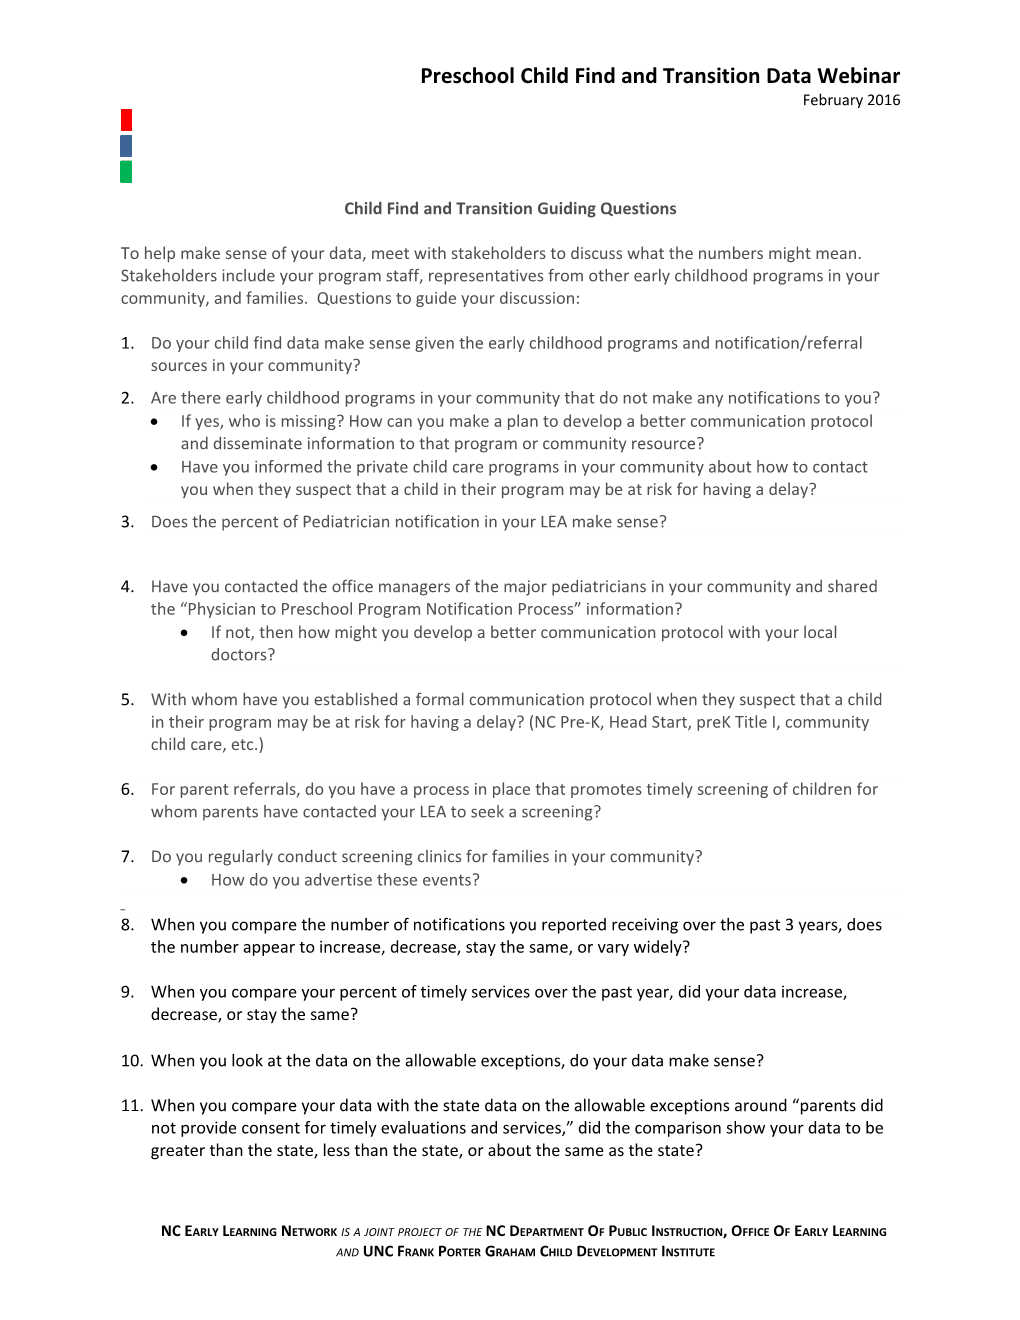 Child Find and Transition Guiding Questions